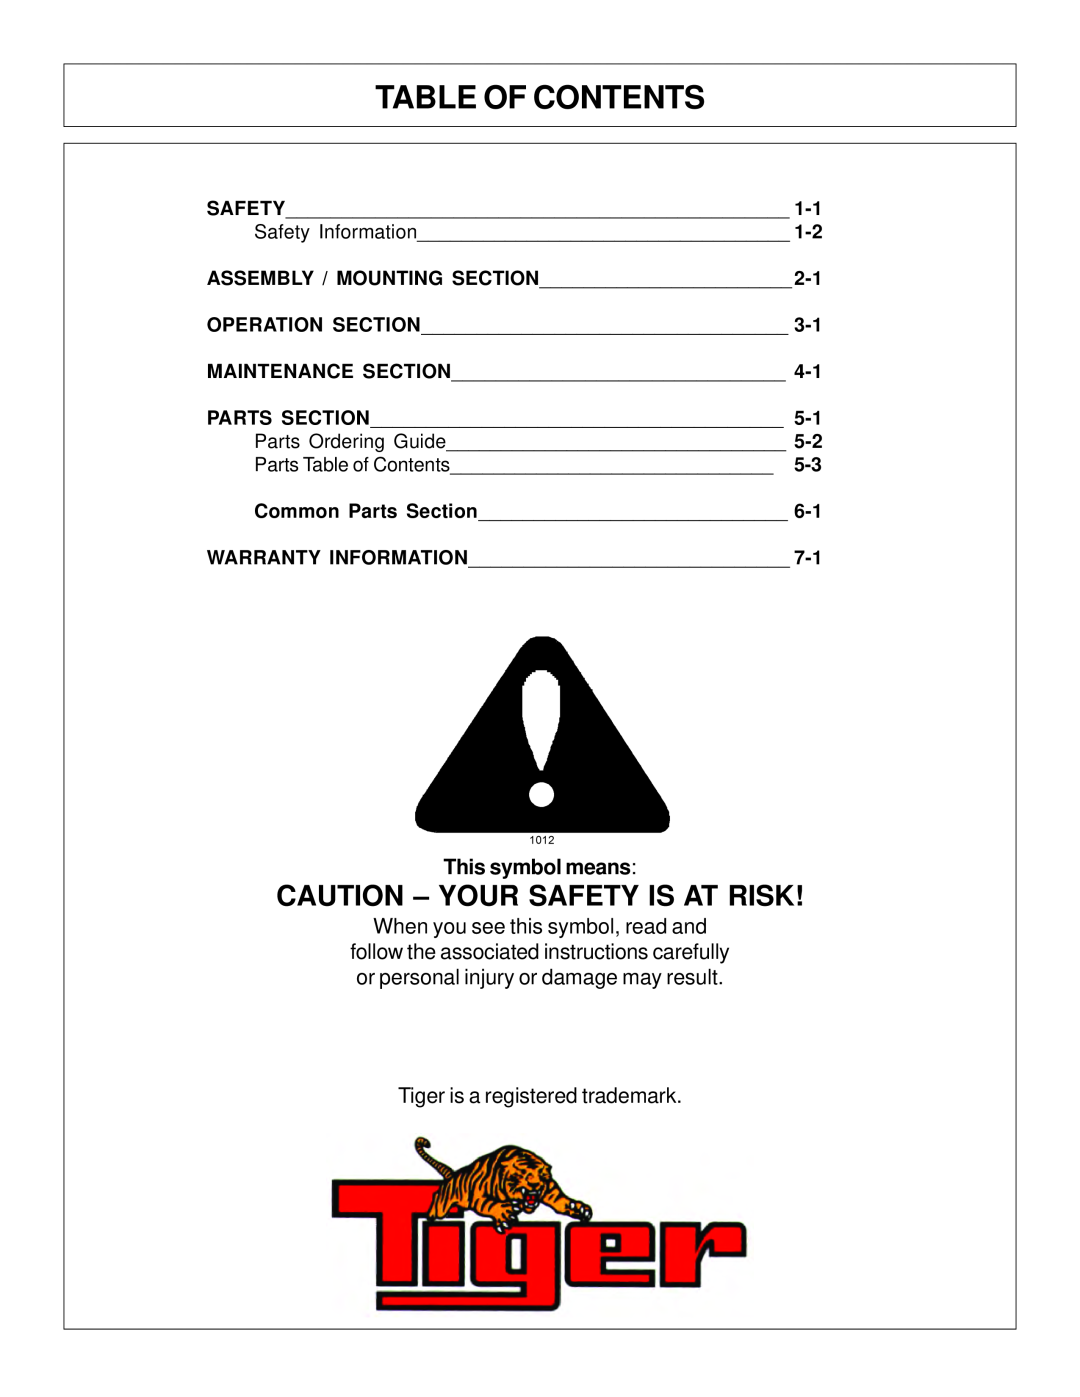 Tiger Products Co., Ltd TS 100A manual Table Of Contents, Caution - Your Safety Is At Risk, This symbol means 